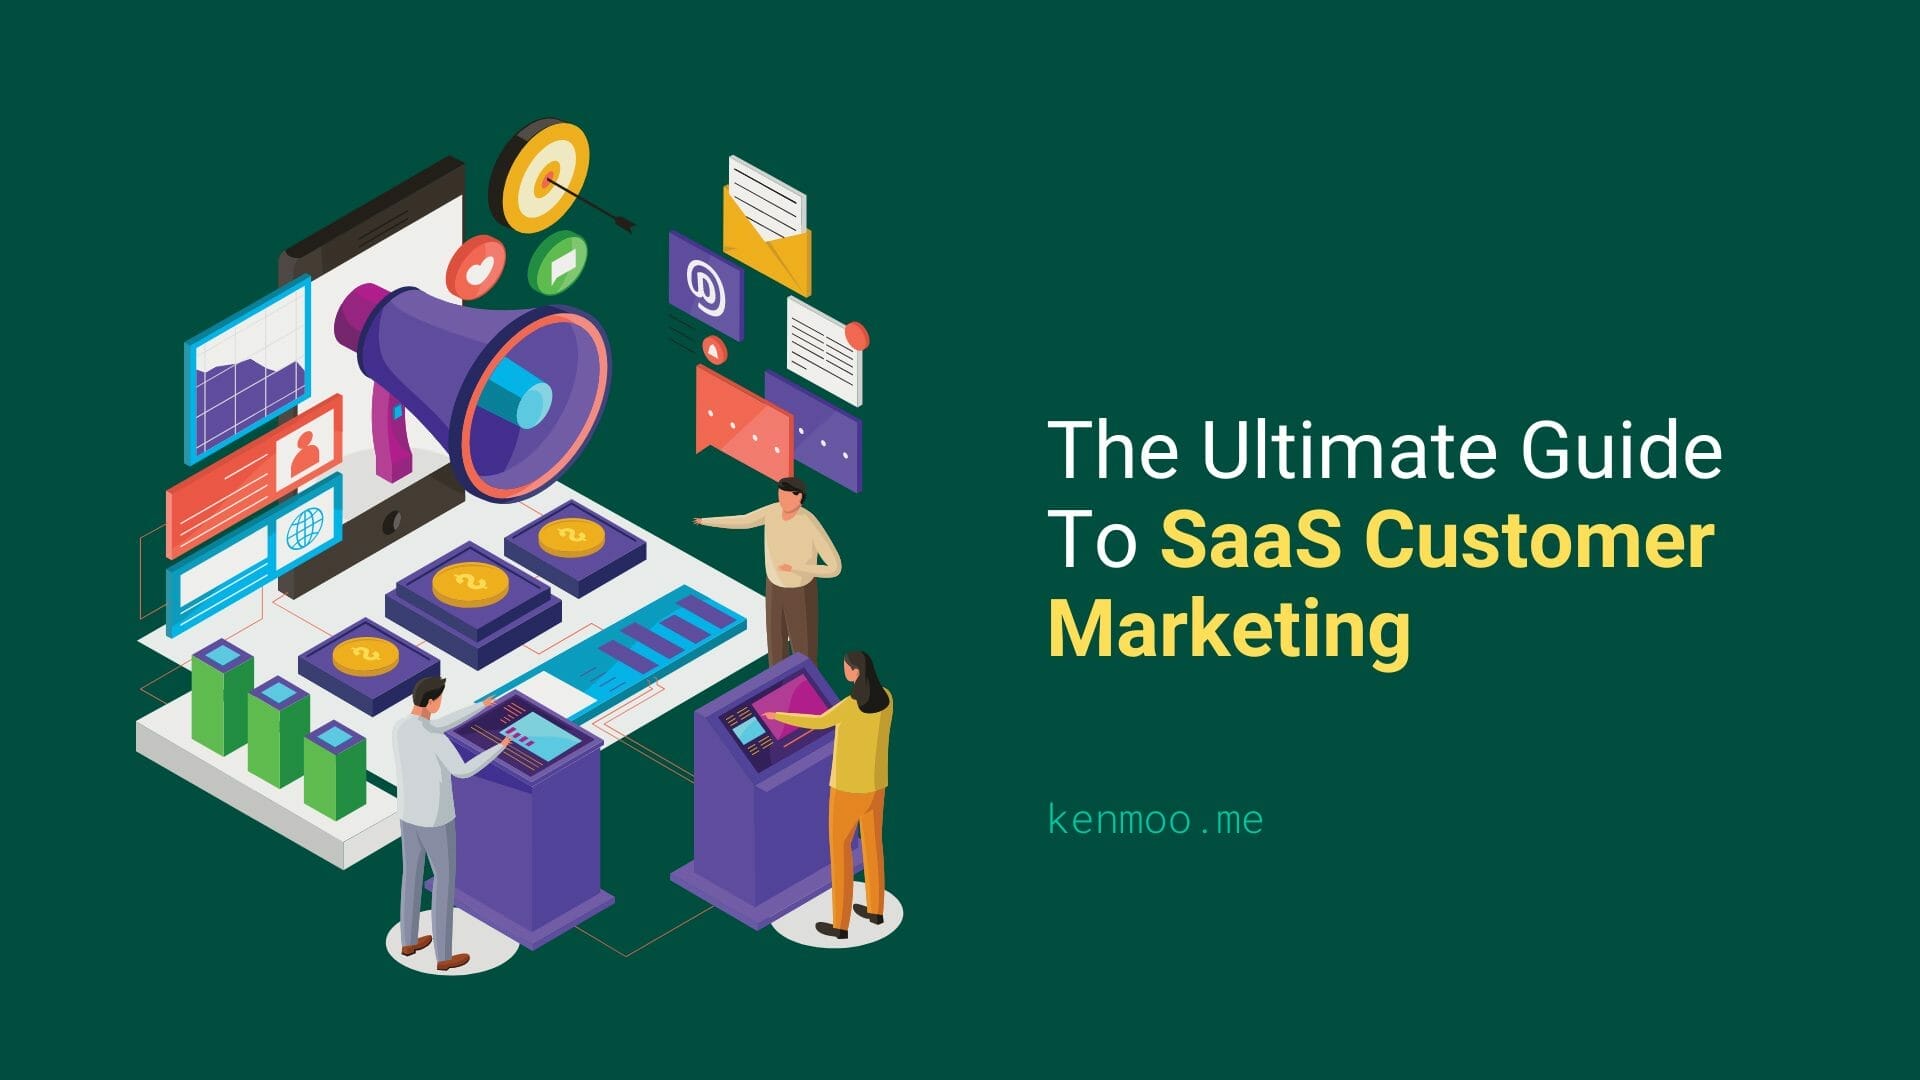 The Ultimate Guide To SaaS Customer Marketing